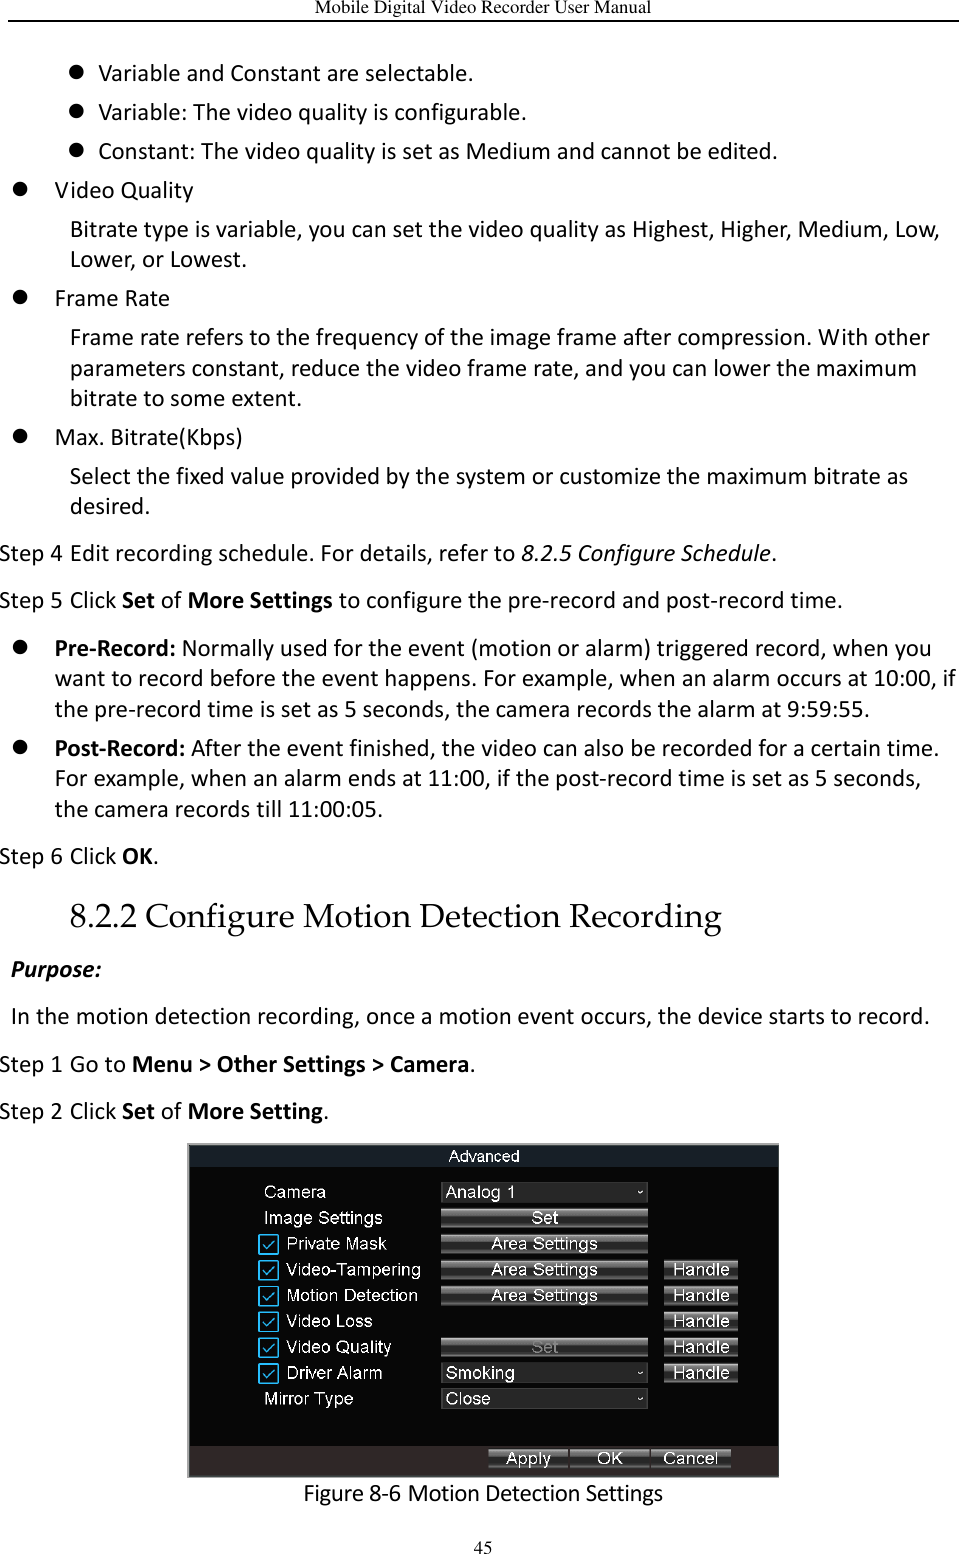 Mobile Digital Video Recorder User Manual 45  Variable and Constant are selectable.  Variable: The video quality is configurable.  Constant: The video quality is set as Medium and cannot be edited.  Video Quality Bitrate type is variable, you can set the video quality as Highest, Higher, Medium, Low, Lower, or Lowest.  Frame Rate Frame rate refers to the frequency of the image frame after compression. With other parameters constant, reduce the video frame rate, and you can lower the maximum bitrate to some extent.  Max. Bitrate(Kbps)   Select the fixed value provided by the system or customize the maximum bitrate as desired. Step 4 Edit recording schedule. For details, refer to 8.2.5 Configure Schedule. Step 5 Click Set of More Settings to configure the pre-record and post-record time.  Pre-Record: Normally used for the event (motion or alarm) triggered record, when you want to record before the event happens. For example, when an alarm occurs at 10:00, if the pre-record time is set as 5 seconds, the camera records the alarm at 9:59:55.  Post-Record: After the event finished, the video can also be recorded for a certain time. For example, when an alarm ends at 11:00, if the post-record time is set as 5 seconds, the camera records till 11:00:05. Step 6 Click OK. 8.2.2 Configure Motion Detection Recording Purpose:   In the motion detection recording, once a motion event occurs, the device starts to record. Step 1 Go to Menu &gt; Other Settings &gt; Camera. Step 2 Click Set of More Setting.  Figure 8-6 Motion Detection Settings 